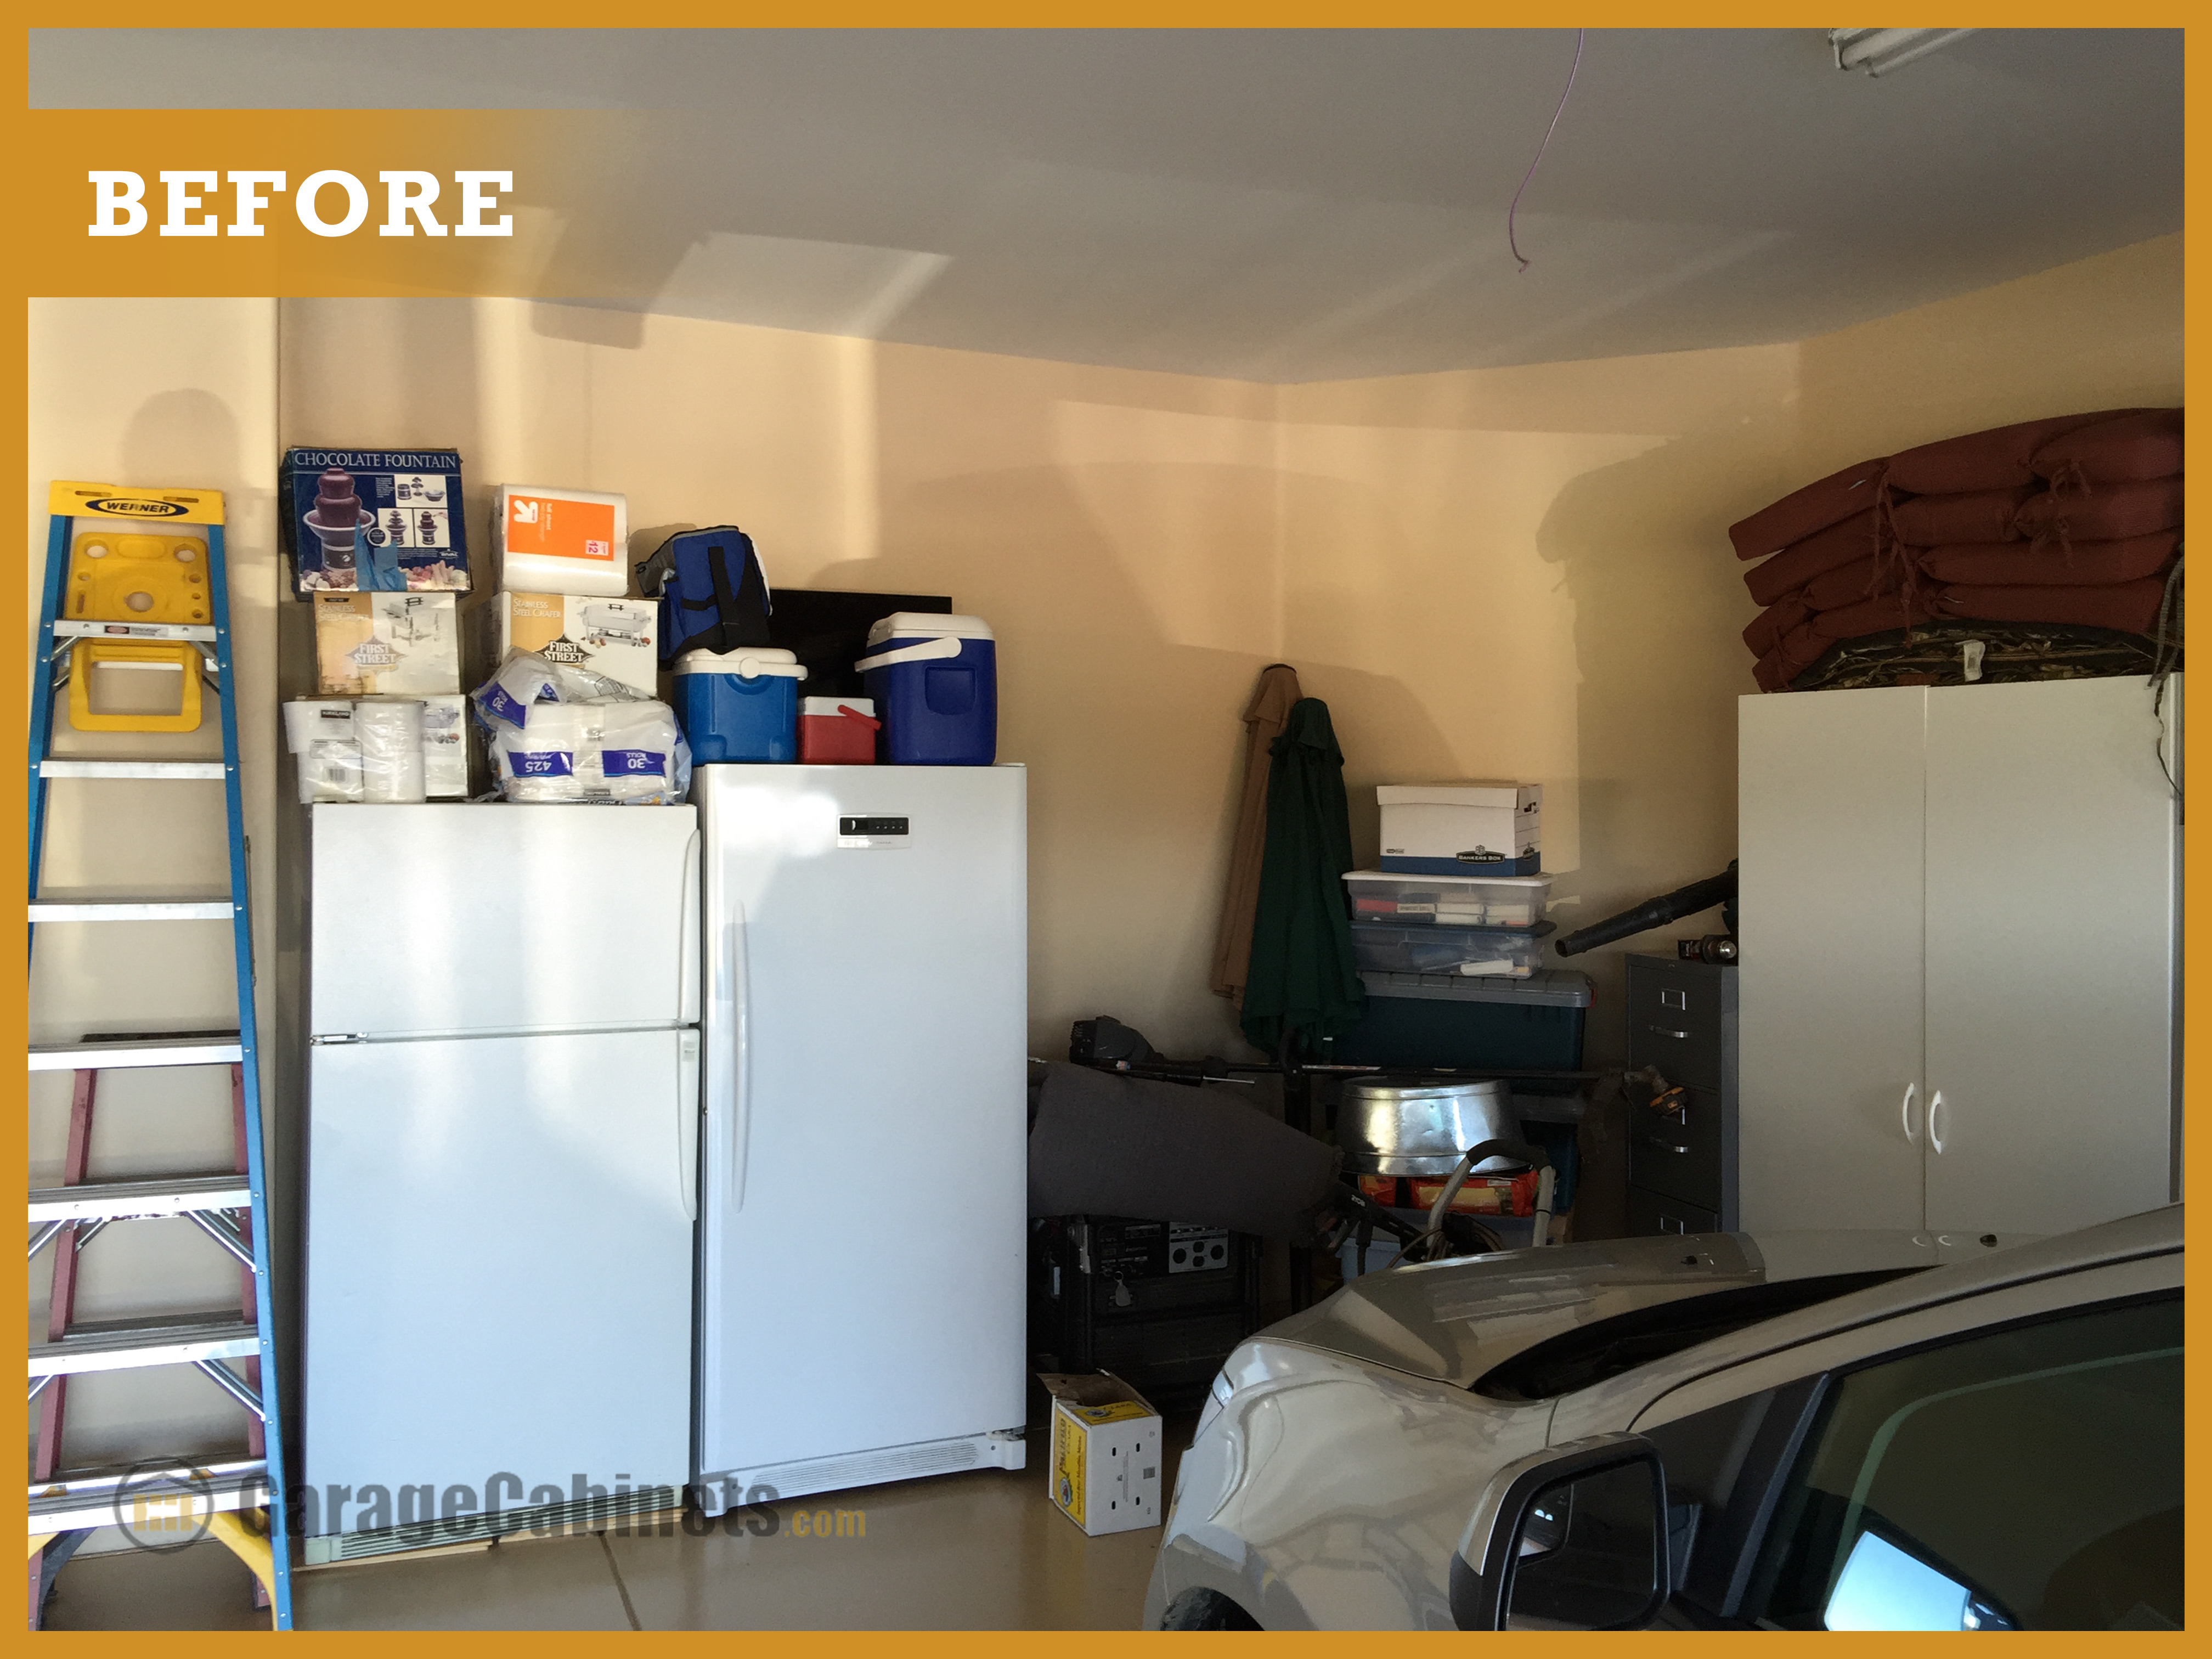 "Before" images of unorganized garage in need of storage cabinets.